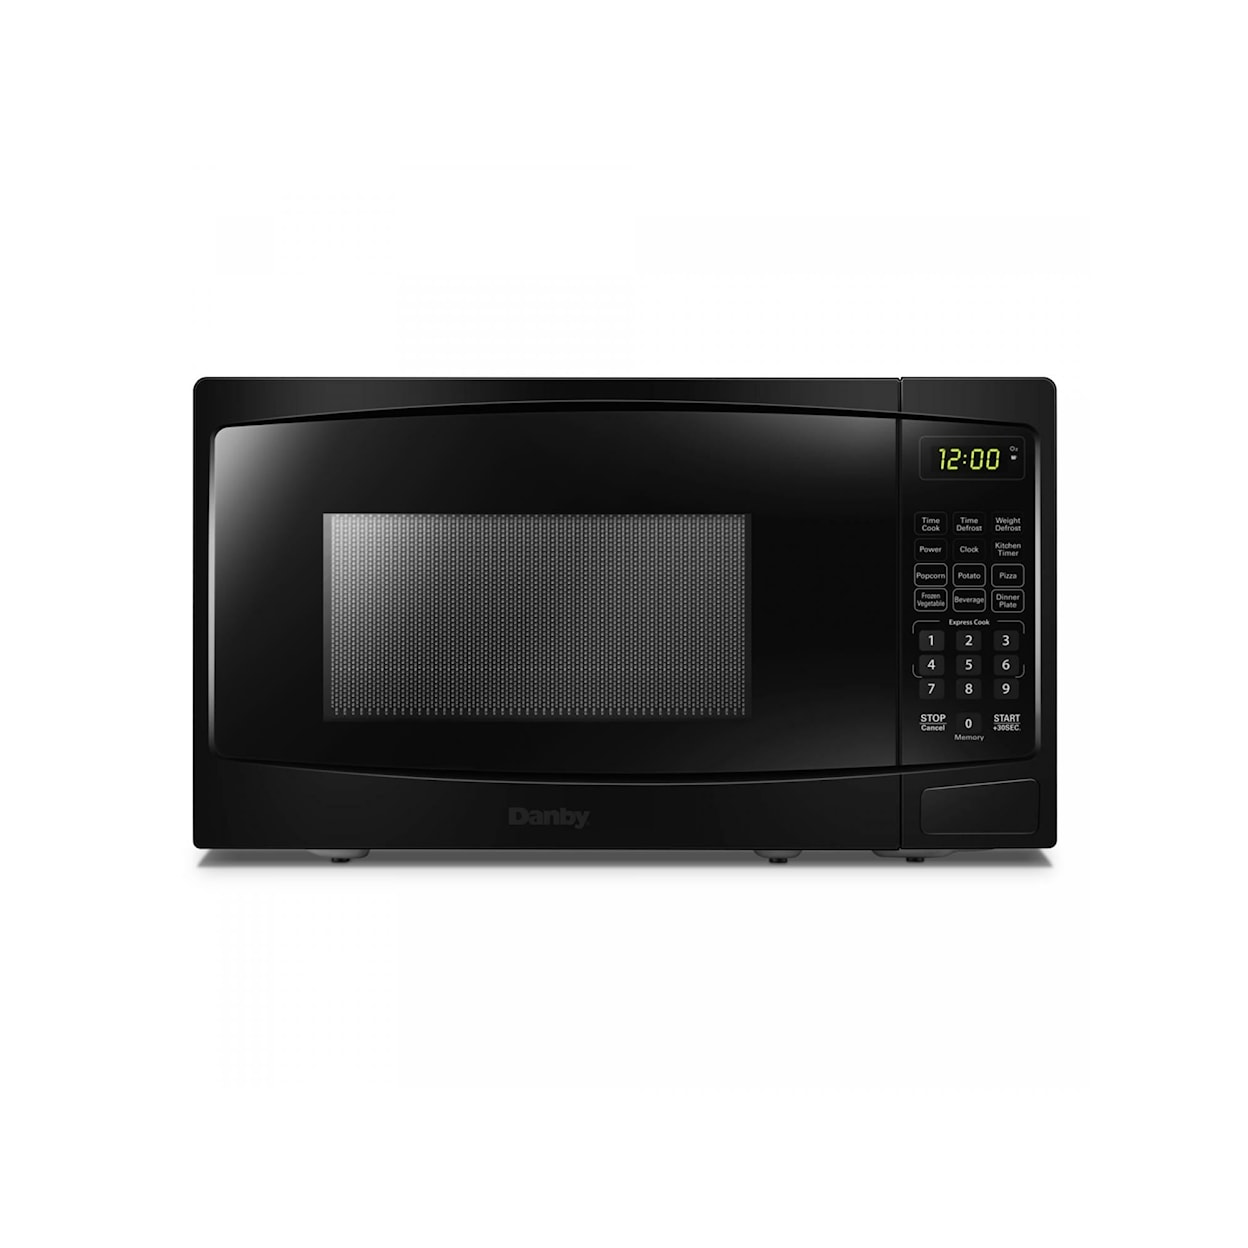 Danby 0.7 cu. ft. Countertop Microwave in Stainless Steel - DBMW0721BBS